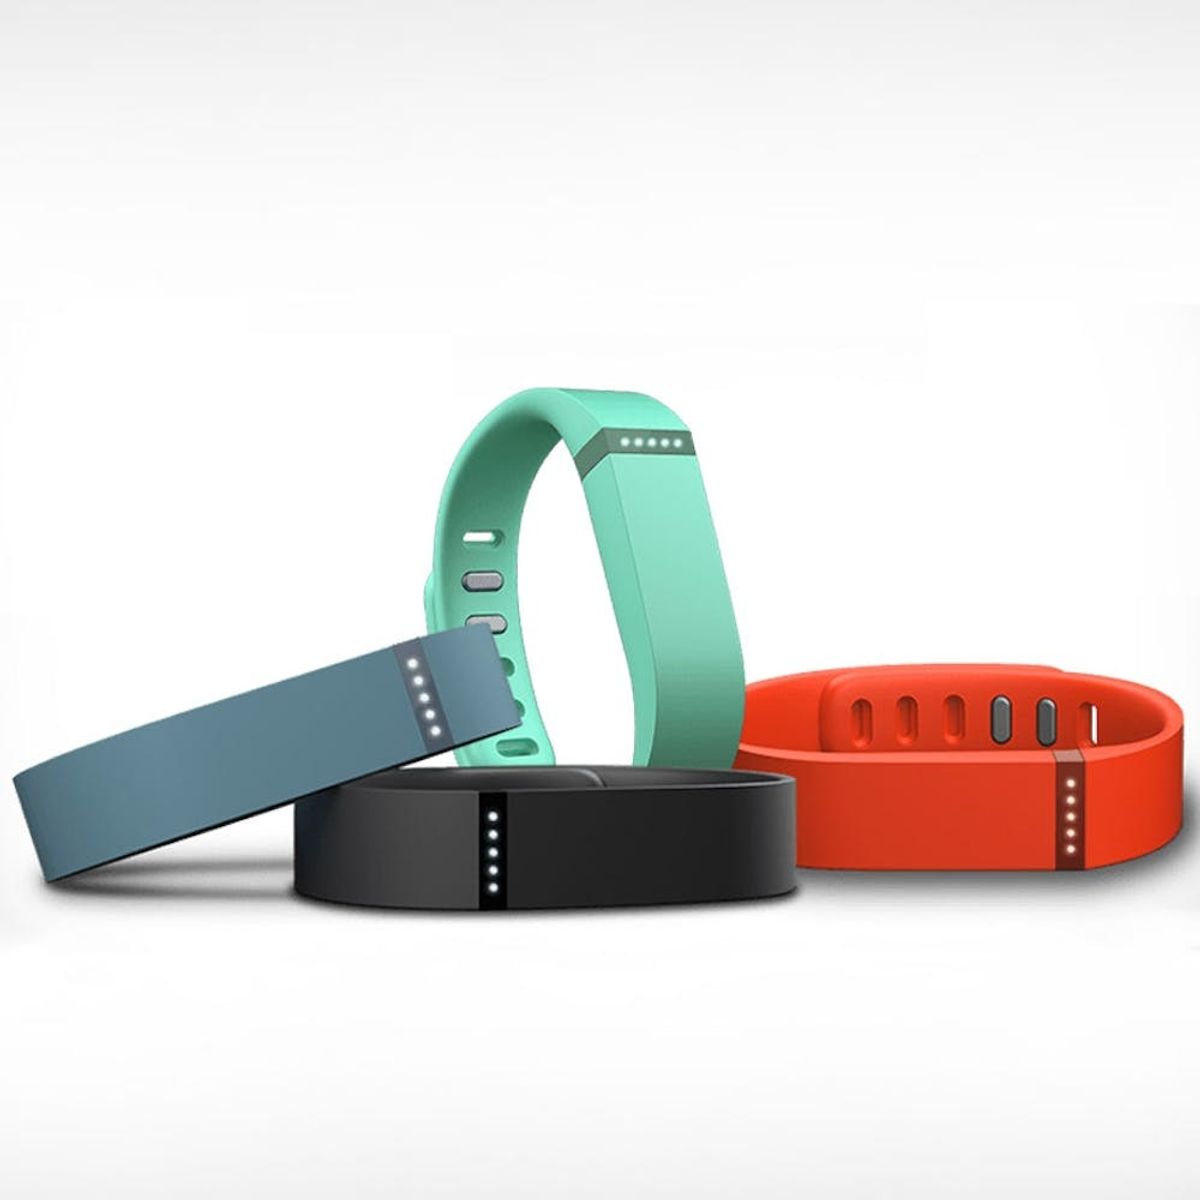 Whoa: Fitbit Just Hinted the Product Image Leak That’s Trending Might Be Totally False